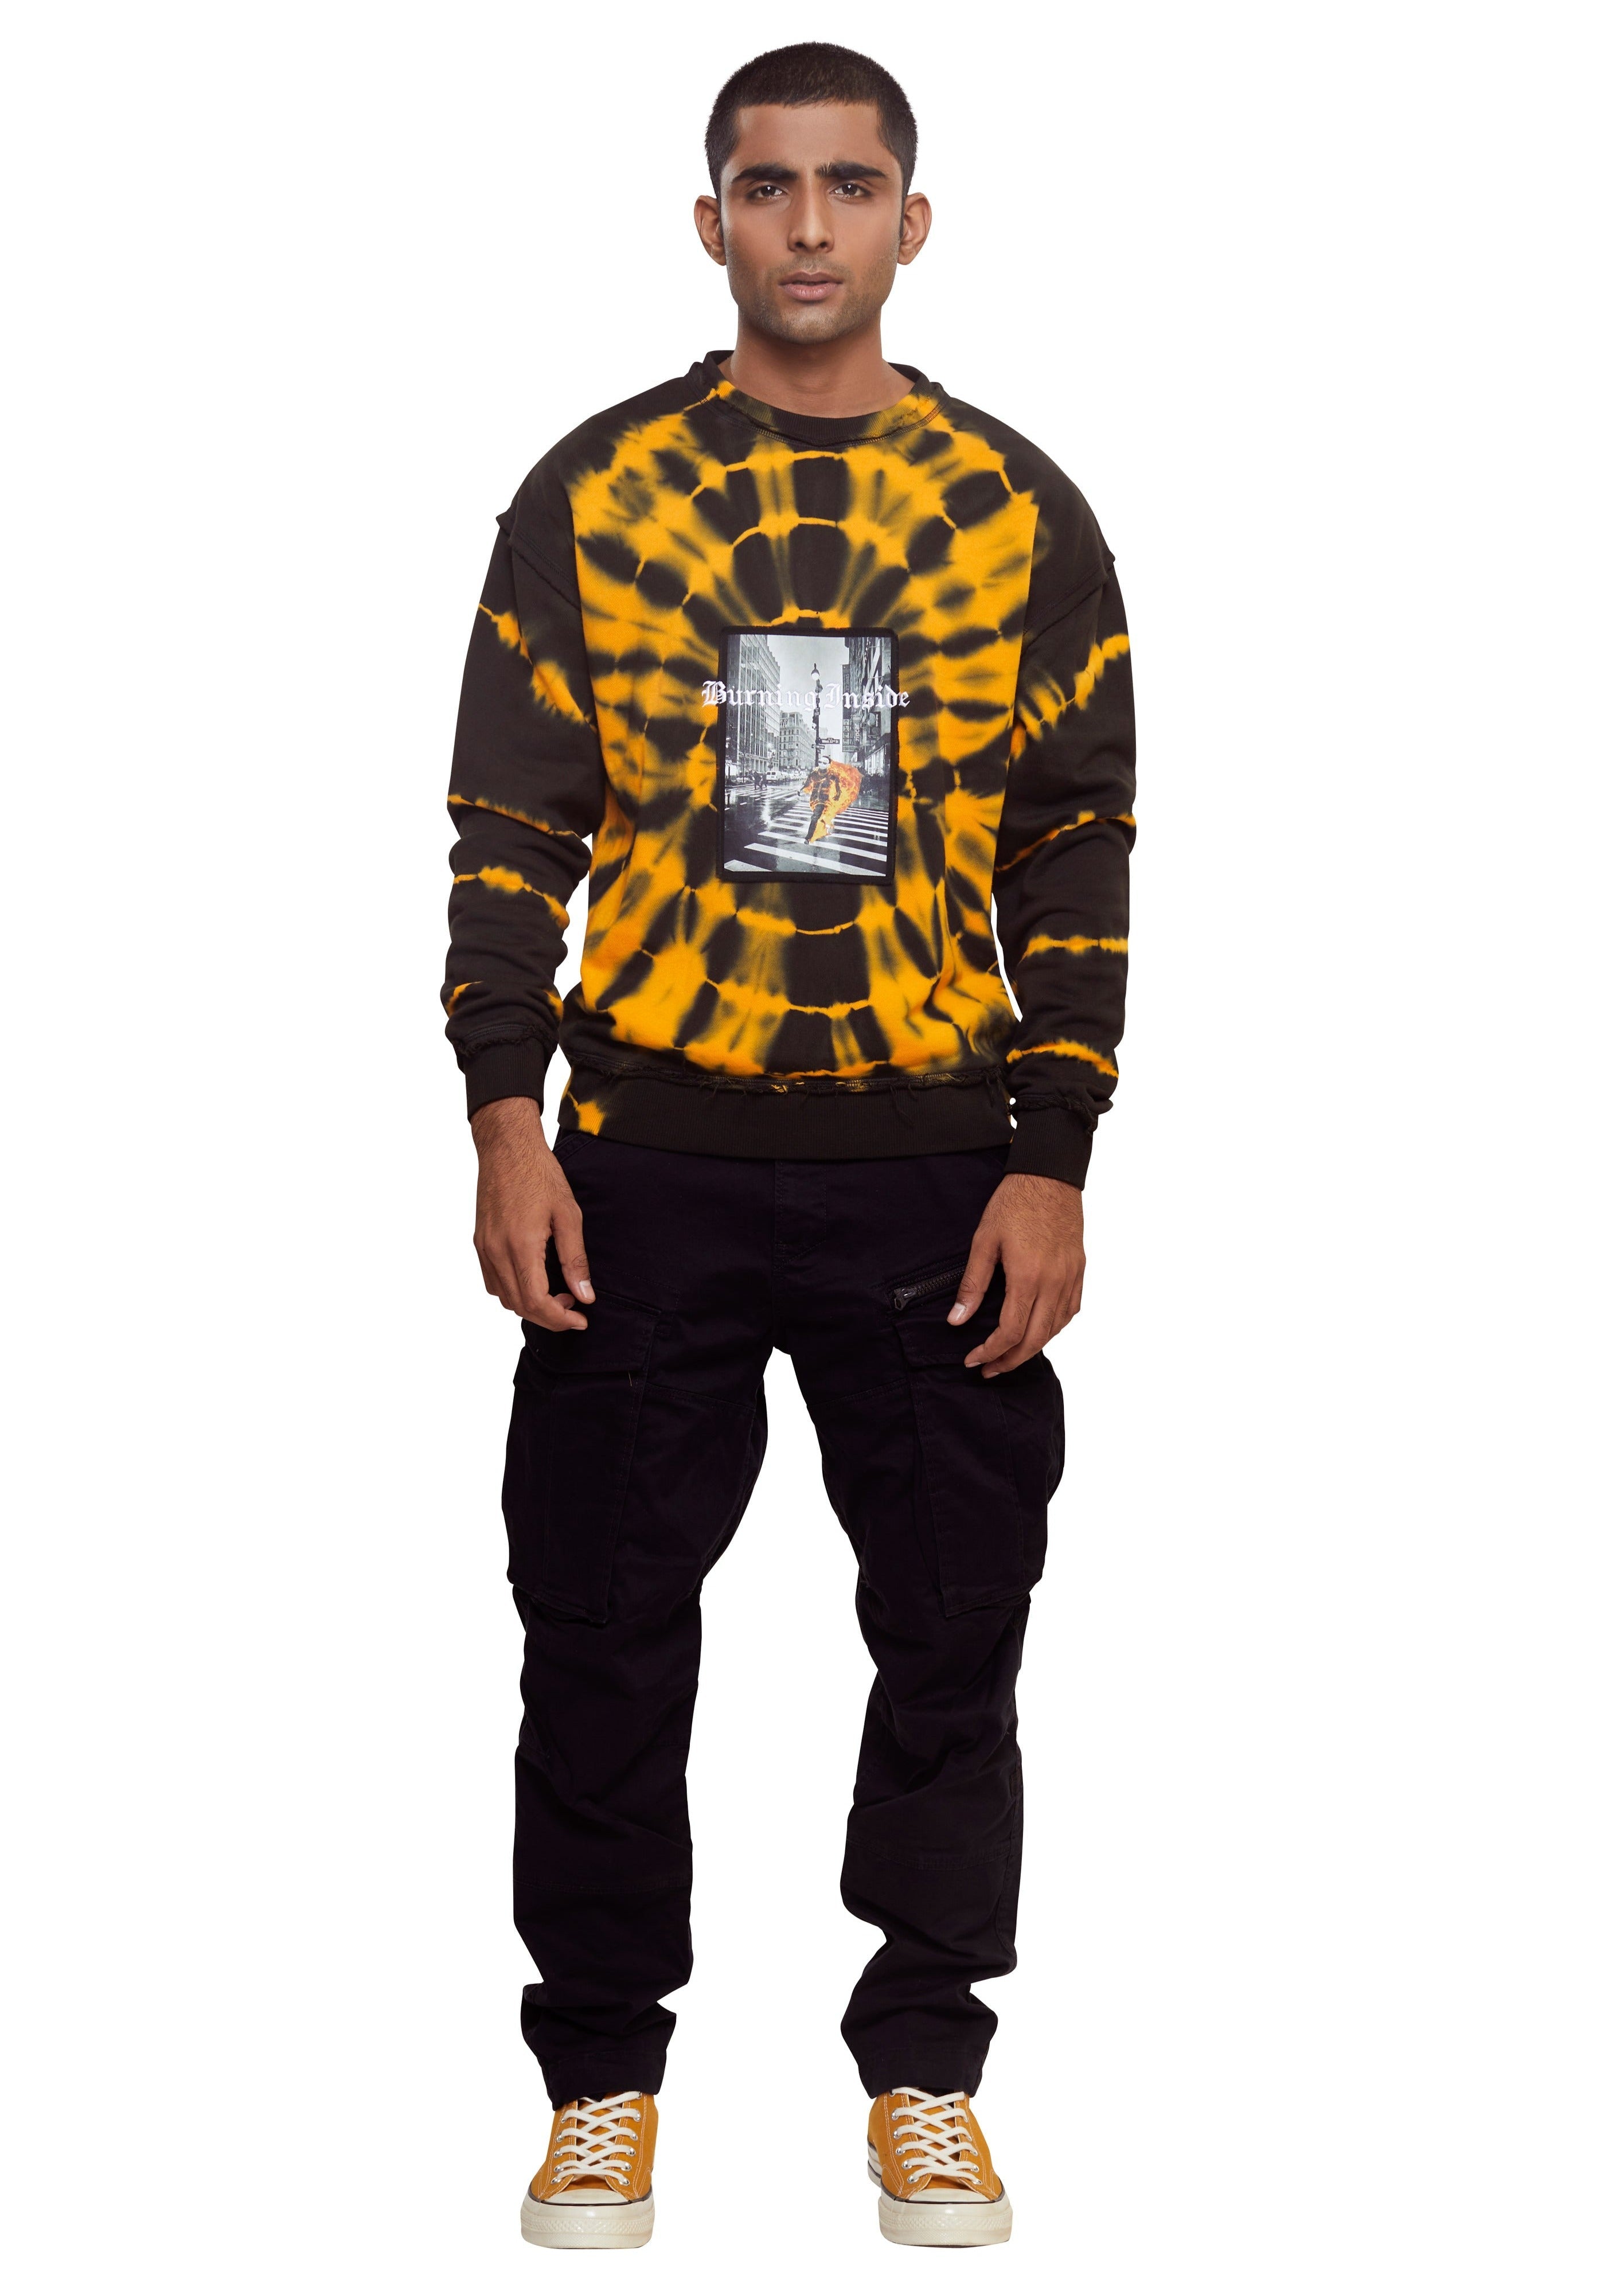 Black and orange Circle tie-dye cotton "Burning" appliquÃ© over-sized pull-over crewneck from the brand Haculla